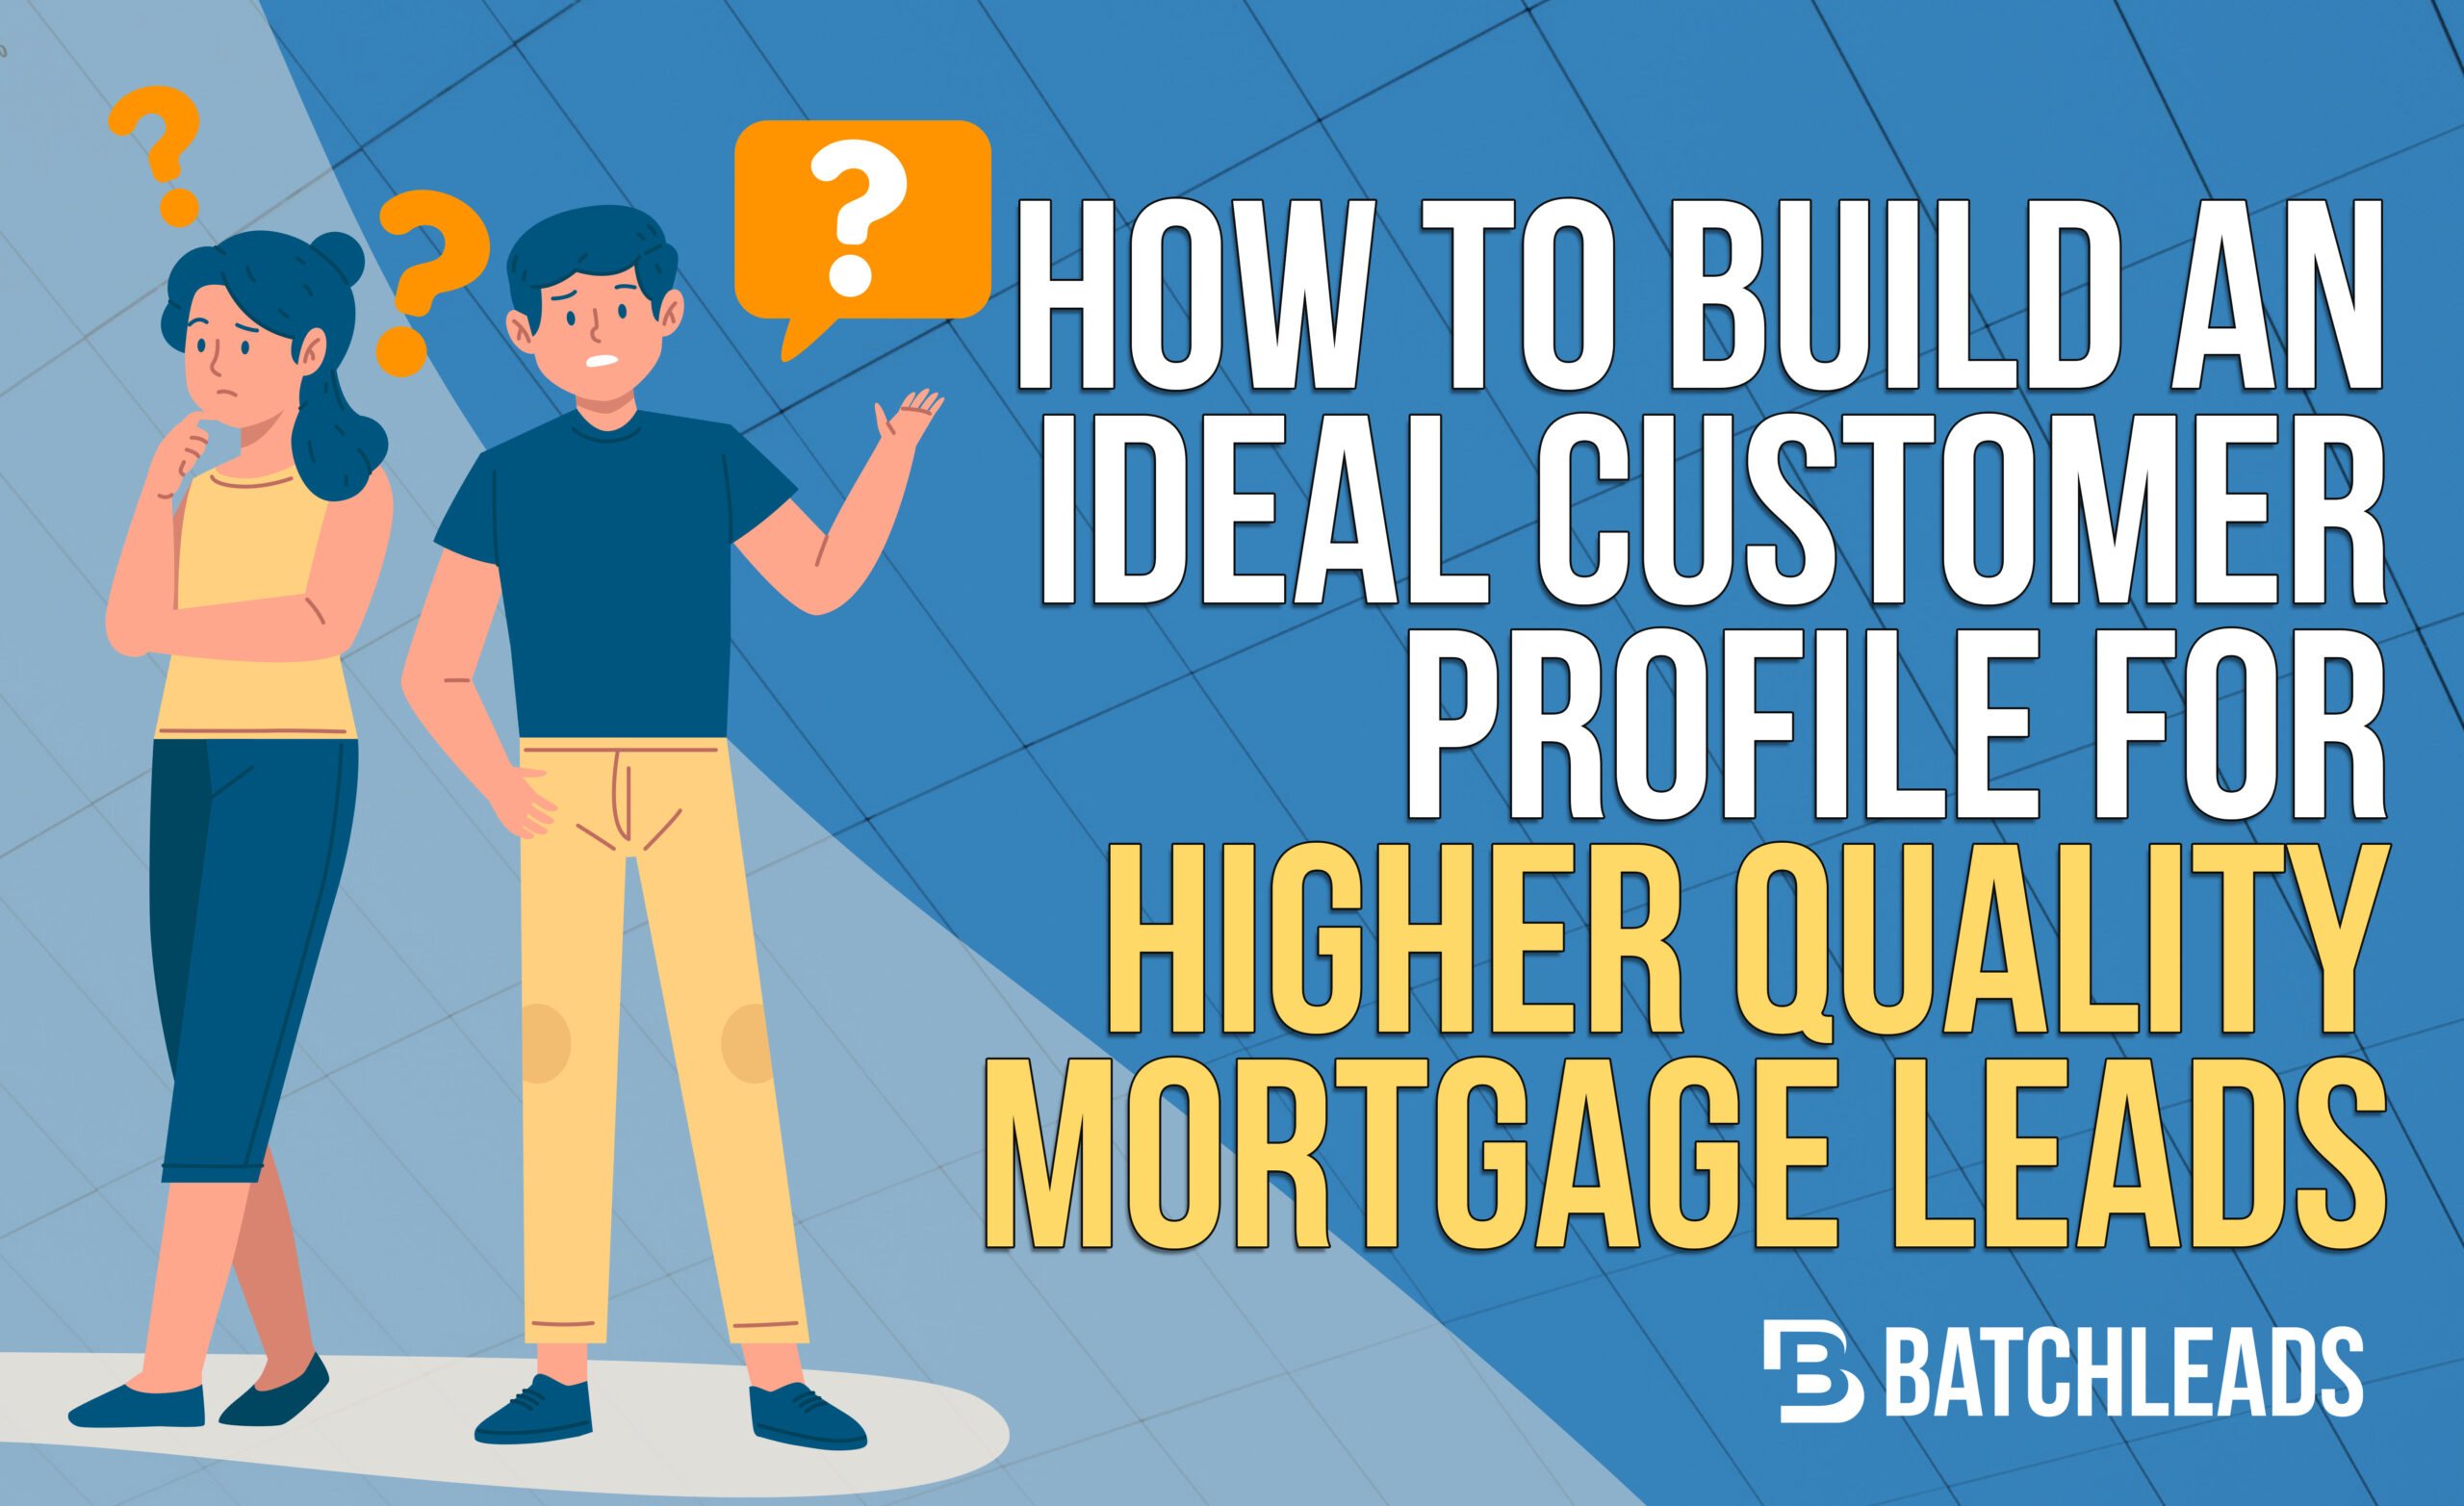 How To Build An Ideal Customer Profile For Higher Quality Mortgage Leads